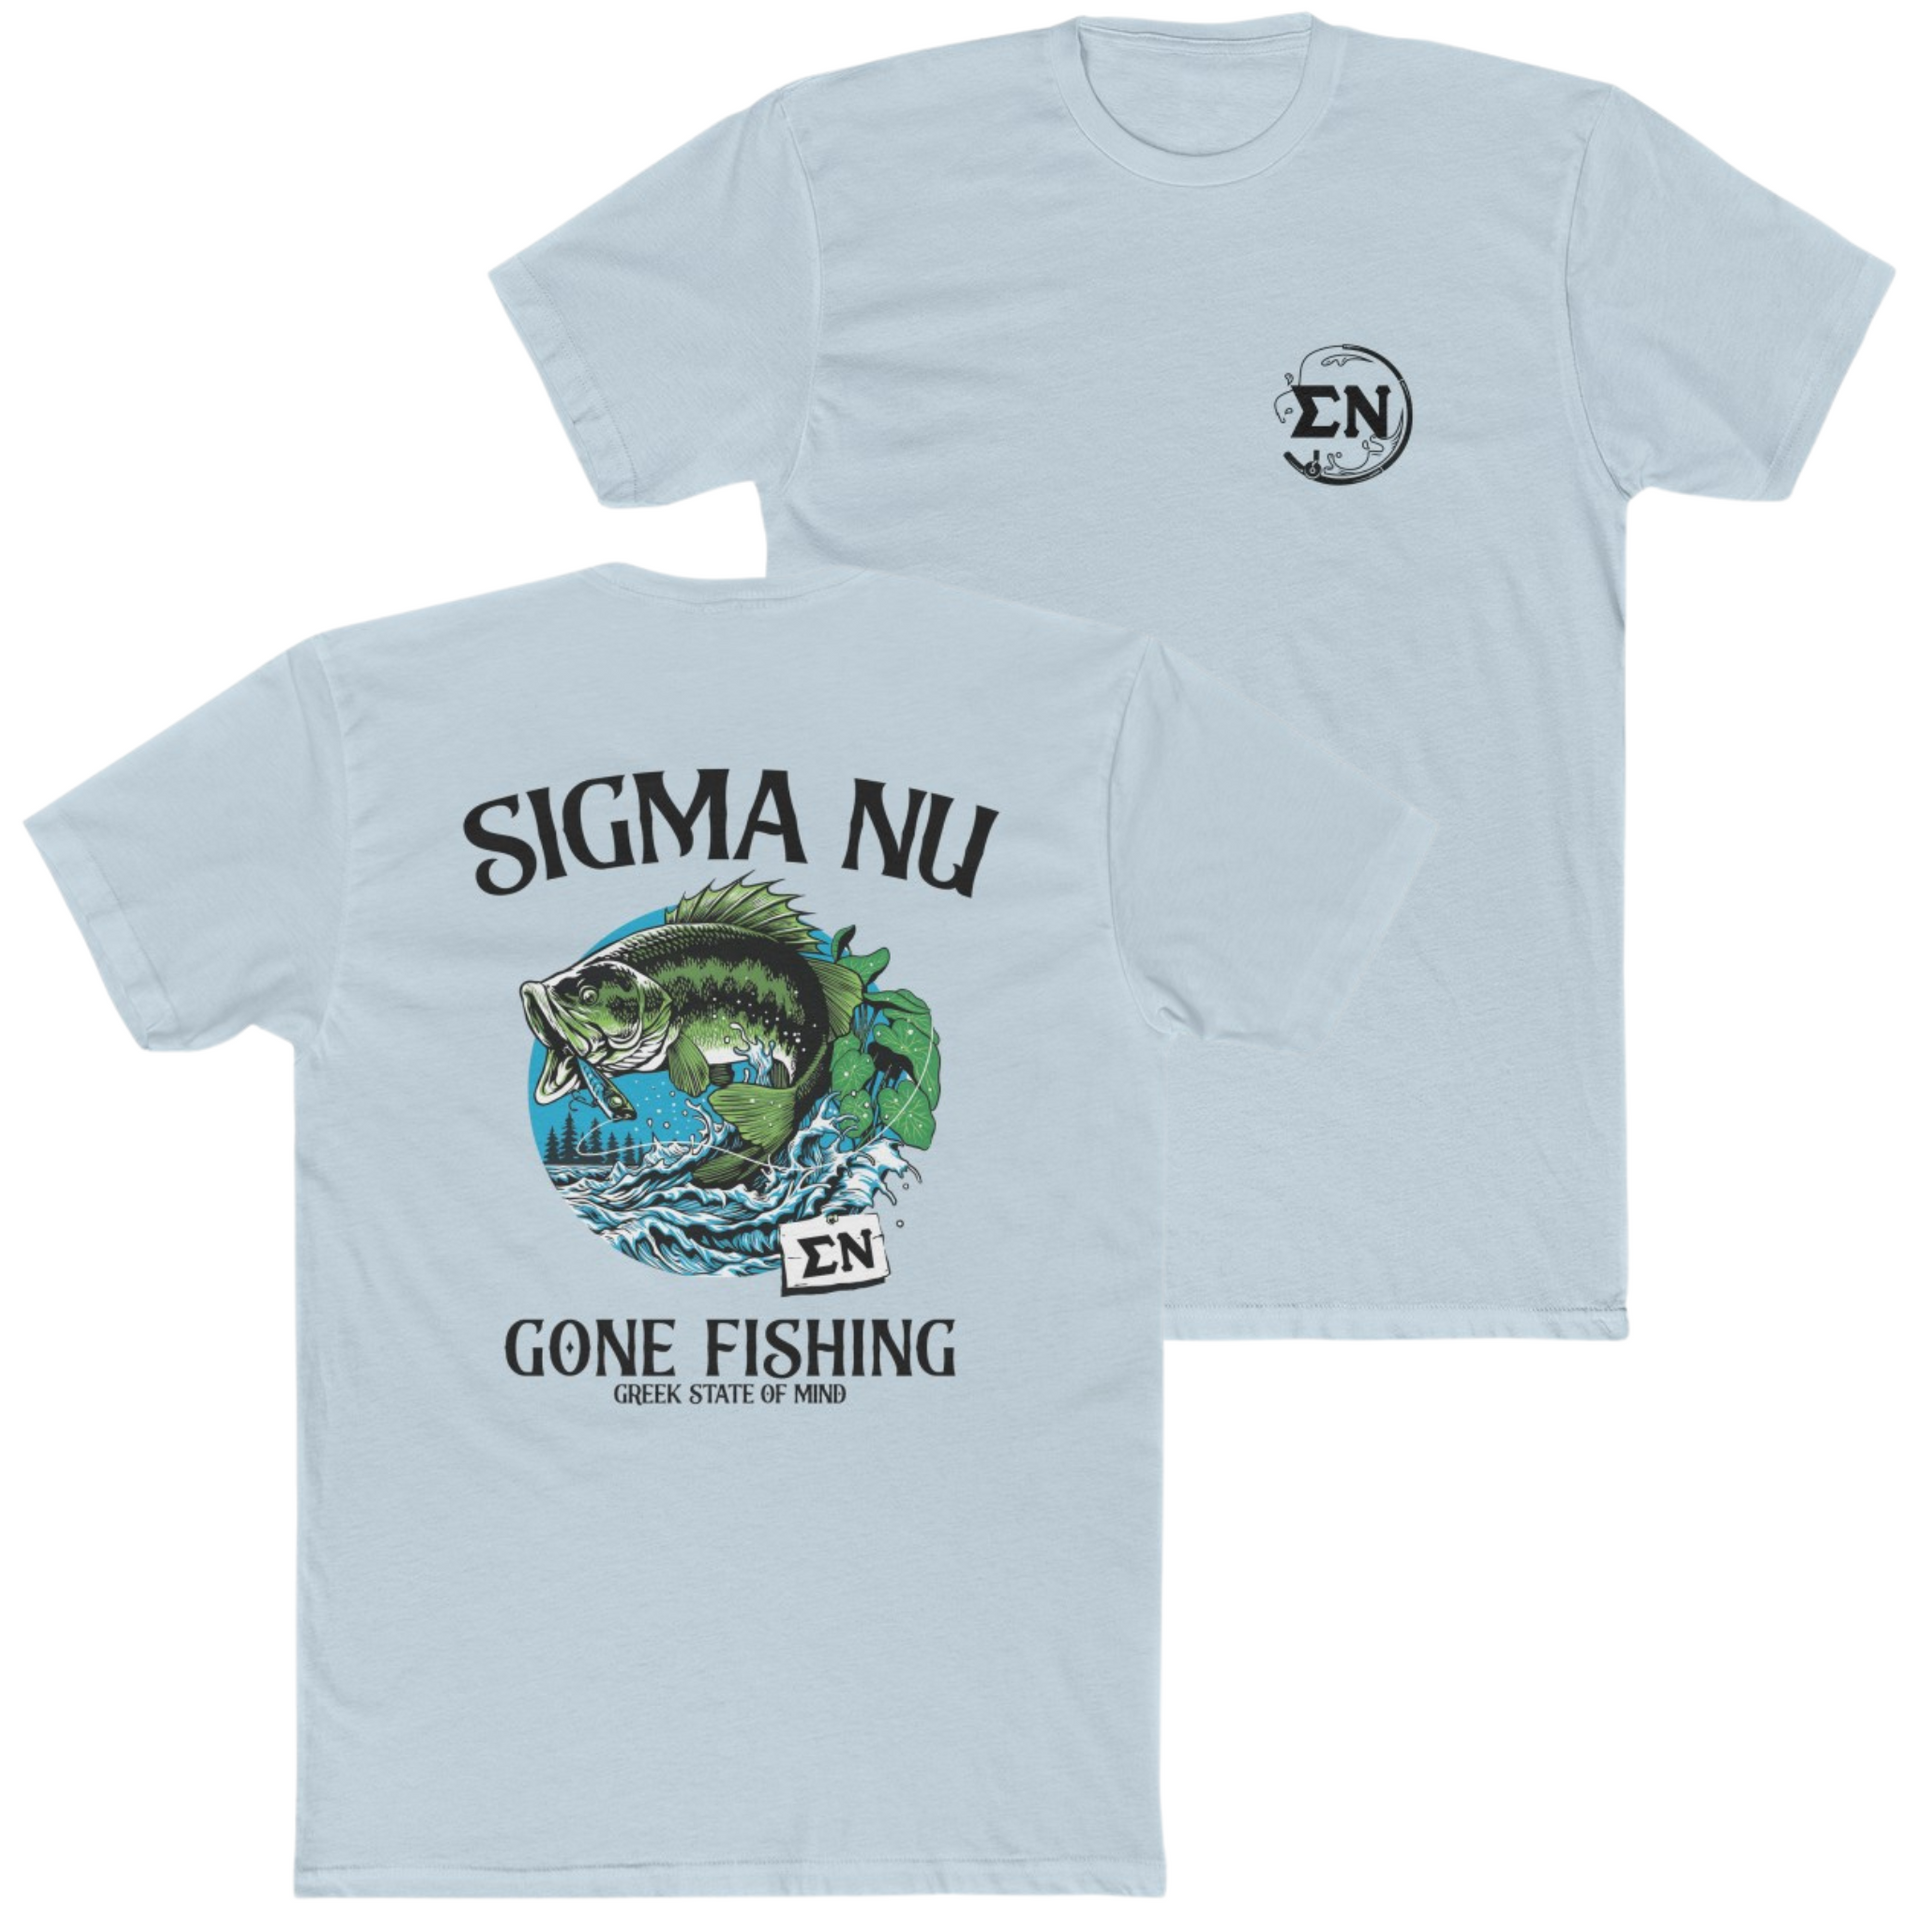 Light Blue Sigma Nu Graphic T-Shirt | Gone Fishing | Sigma Nu Clothing, Apparel and Merchandise 